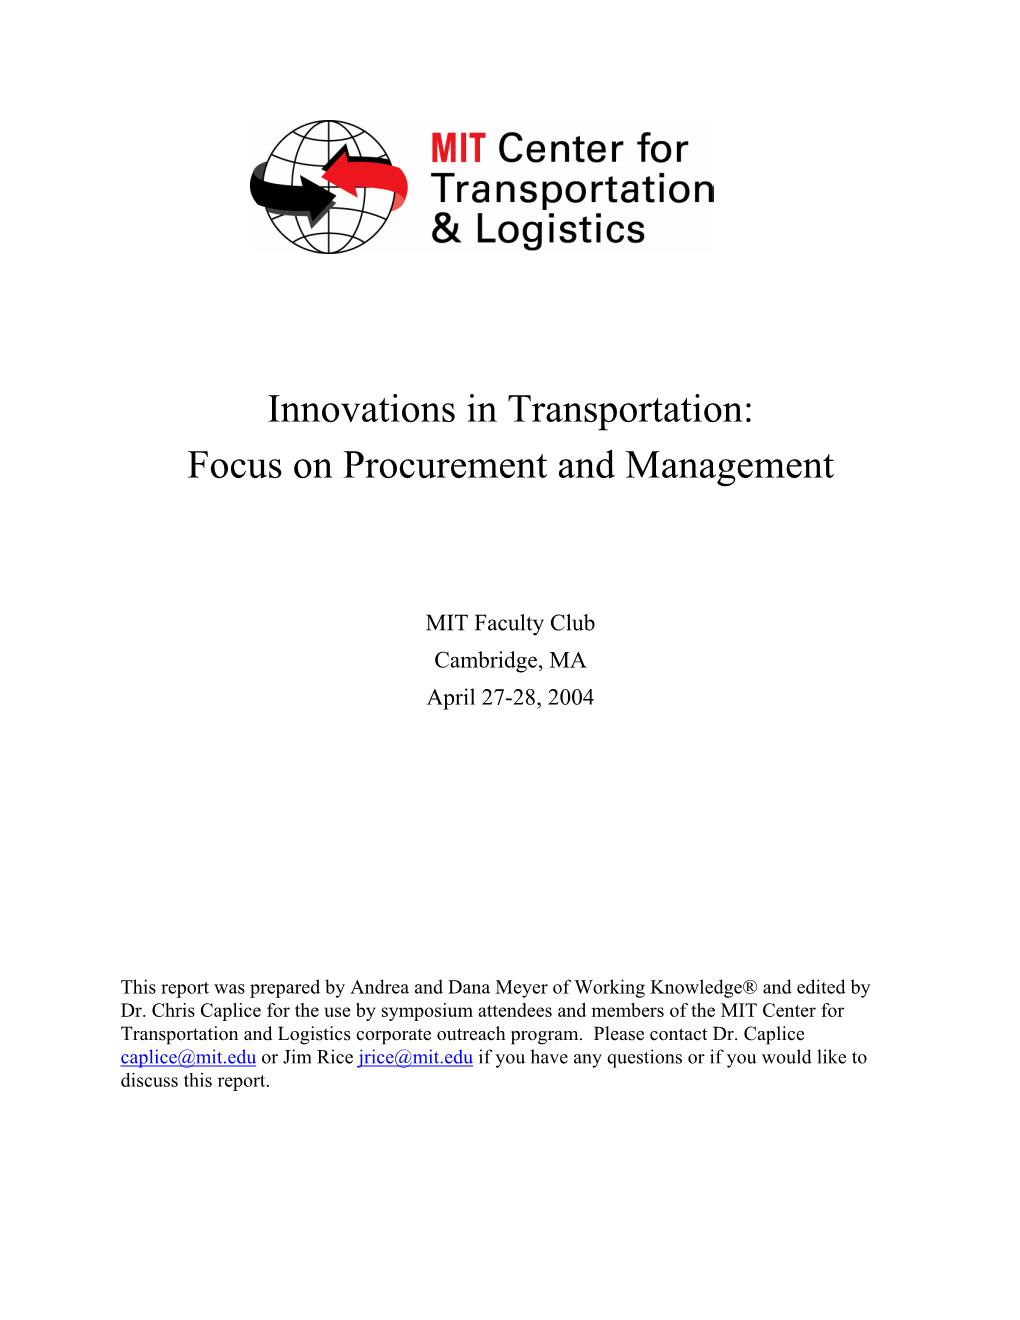 Innovations in Transportation: Focus on Procurement and Management